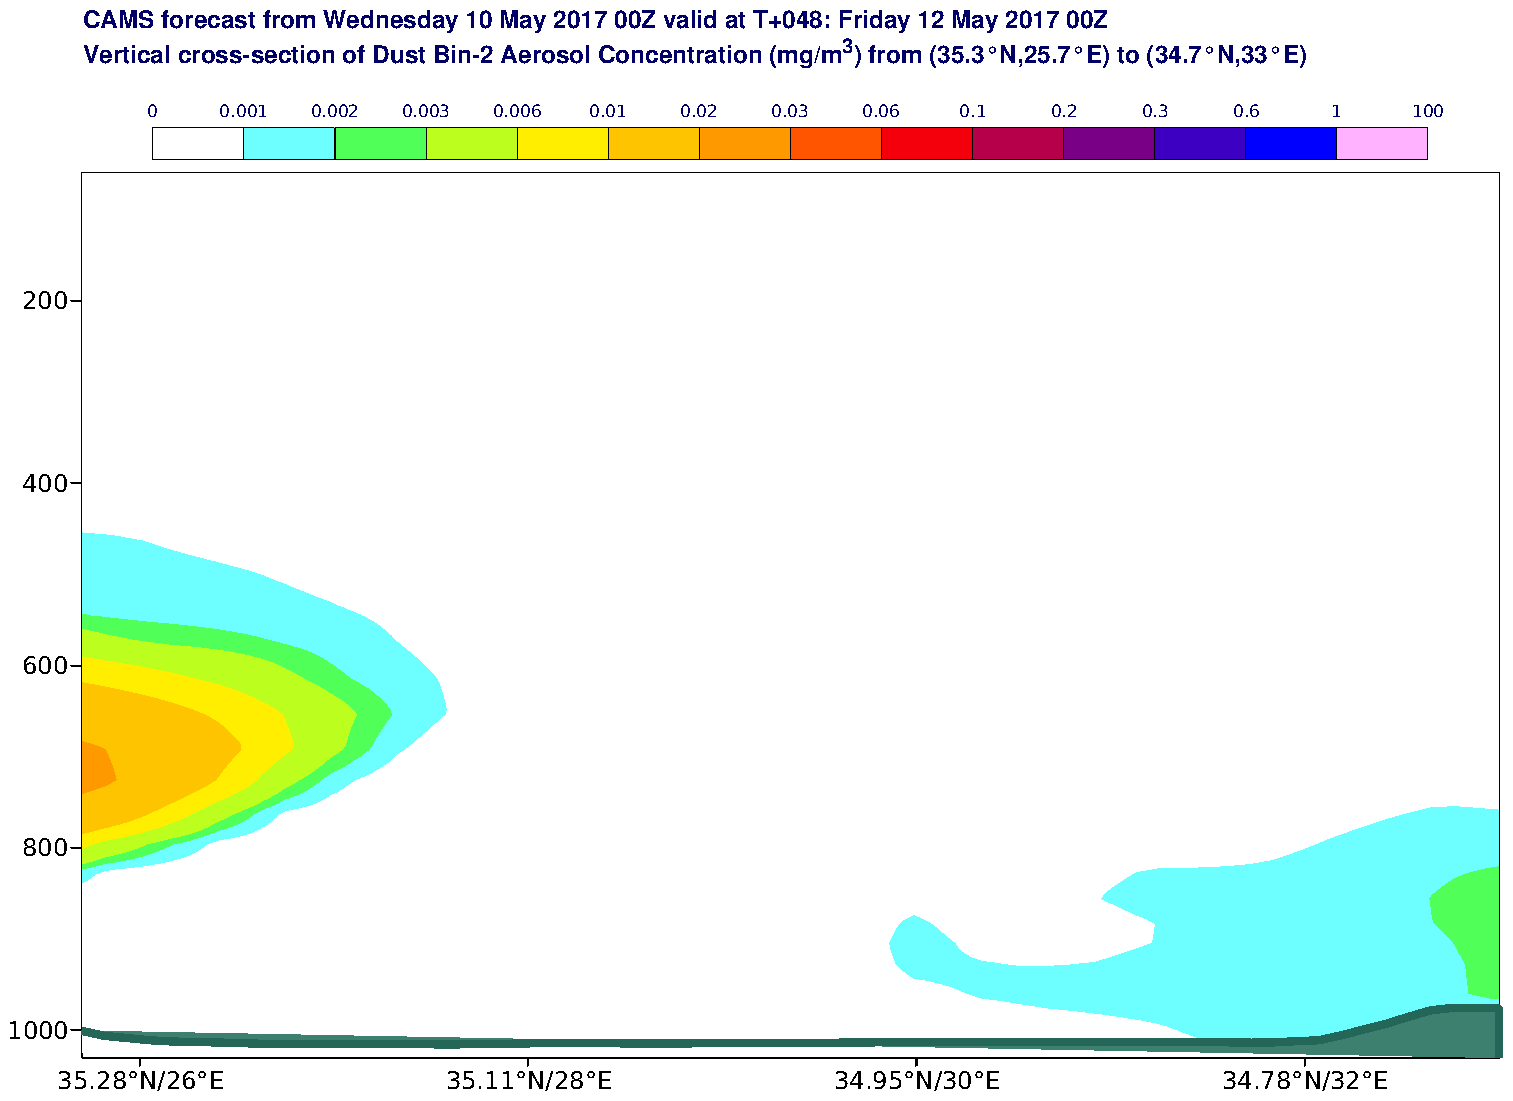 Vertical cross-section of Dust Bin-2 Aerosol Concentration (mg/m3) valid at T48 - 2017-05-12 00:00